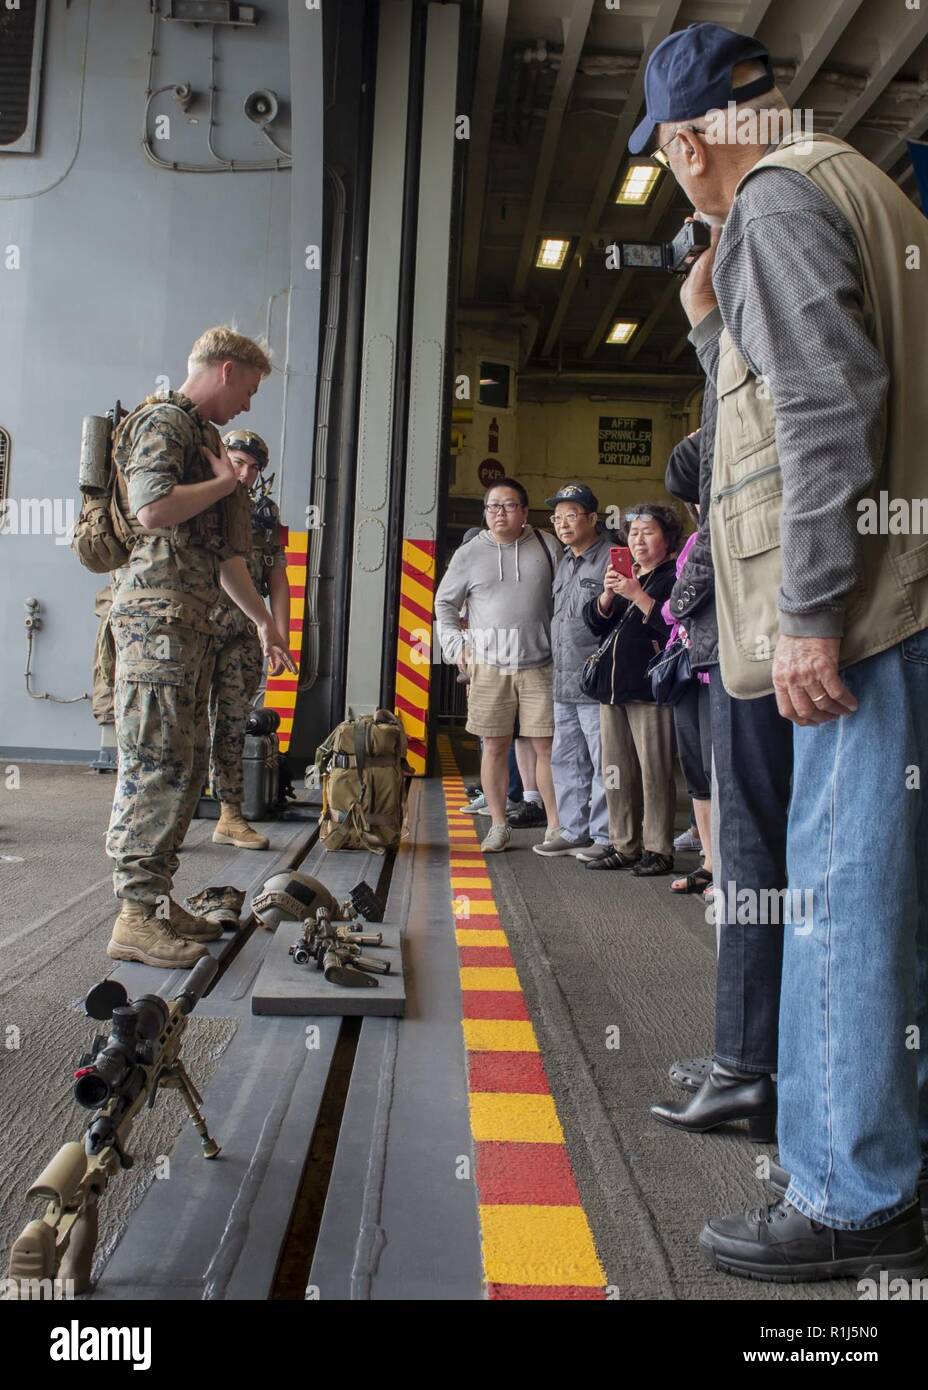 SAN FRANCISCO (Oct. 4, 2018) Sgt. Jack Seward, from Huntington Beach, Calif., assigned to the 3rd Battalion, 11th Marine Division, displays Marine equipment to visitors during a general public ship tour of the amphibious assault ship USS Bonhomme Richard (LHD 6) during San Francisco Fleet Week 2018. San Francisco Fleet Week is an opportunity for the American public to meet their Navy, Marine Corps and Coast Guard teams and experience America’s sea services. During fleet week, service members participate in various community service events, showcase capabilities and equipment to the community,  Stock Photo